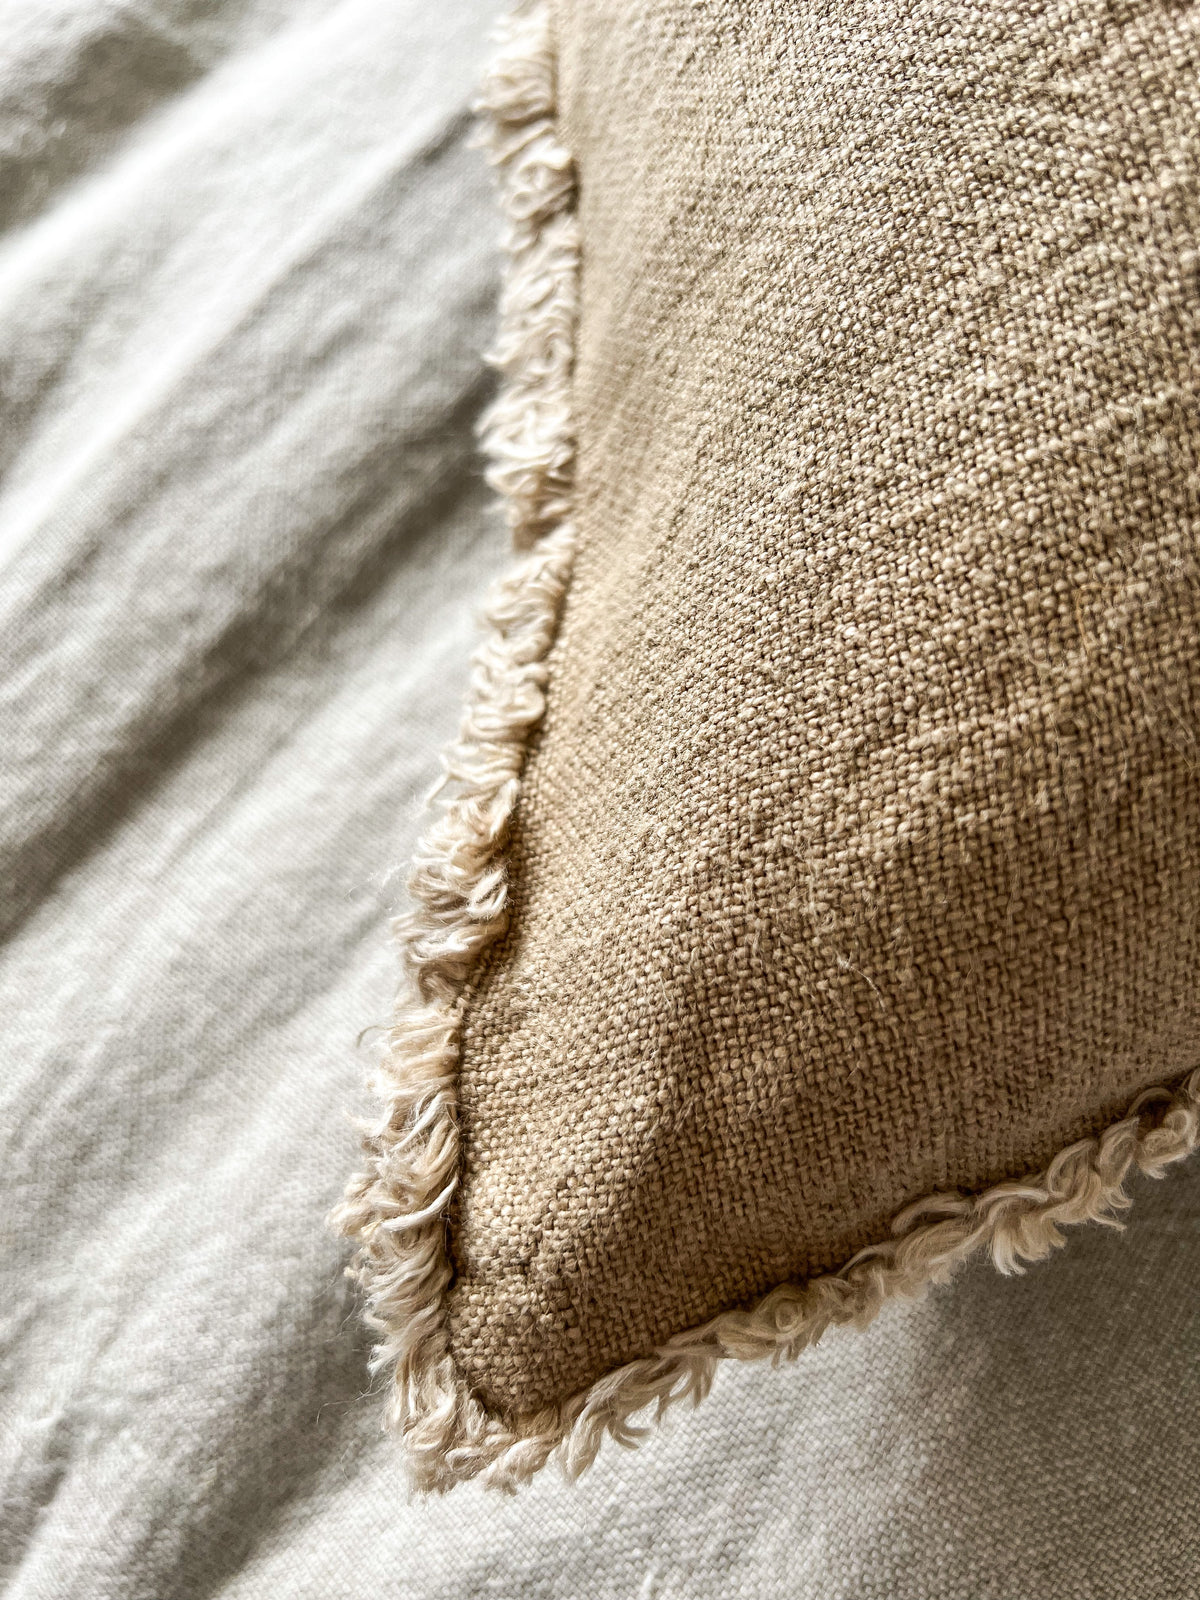 The Aspire Collection oozes quality with its natural texture & a stunning stonewashed finish for added softness. Visually soft, beautifully hand-loomed & available in three curated neutrals designed to pair with one another. Mix & match your favourites for a truly luxurious & high quality aesthetic.  100% pure linen | 350gsm Dimensions: 50cm x 50cm